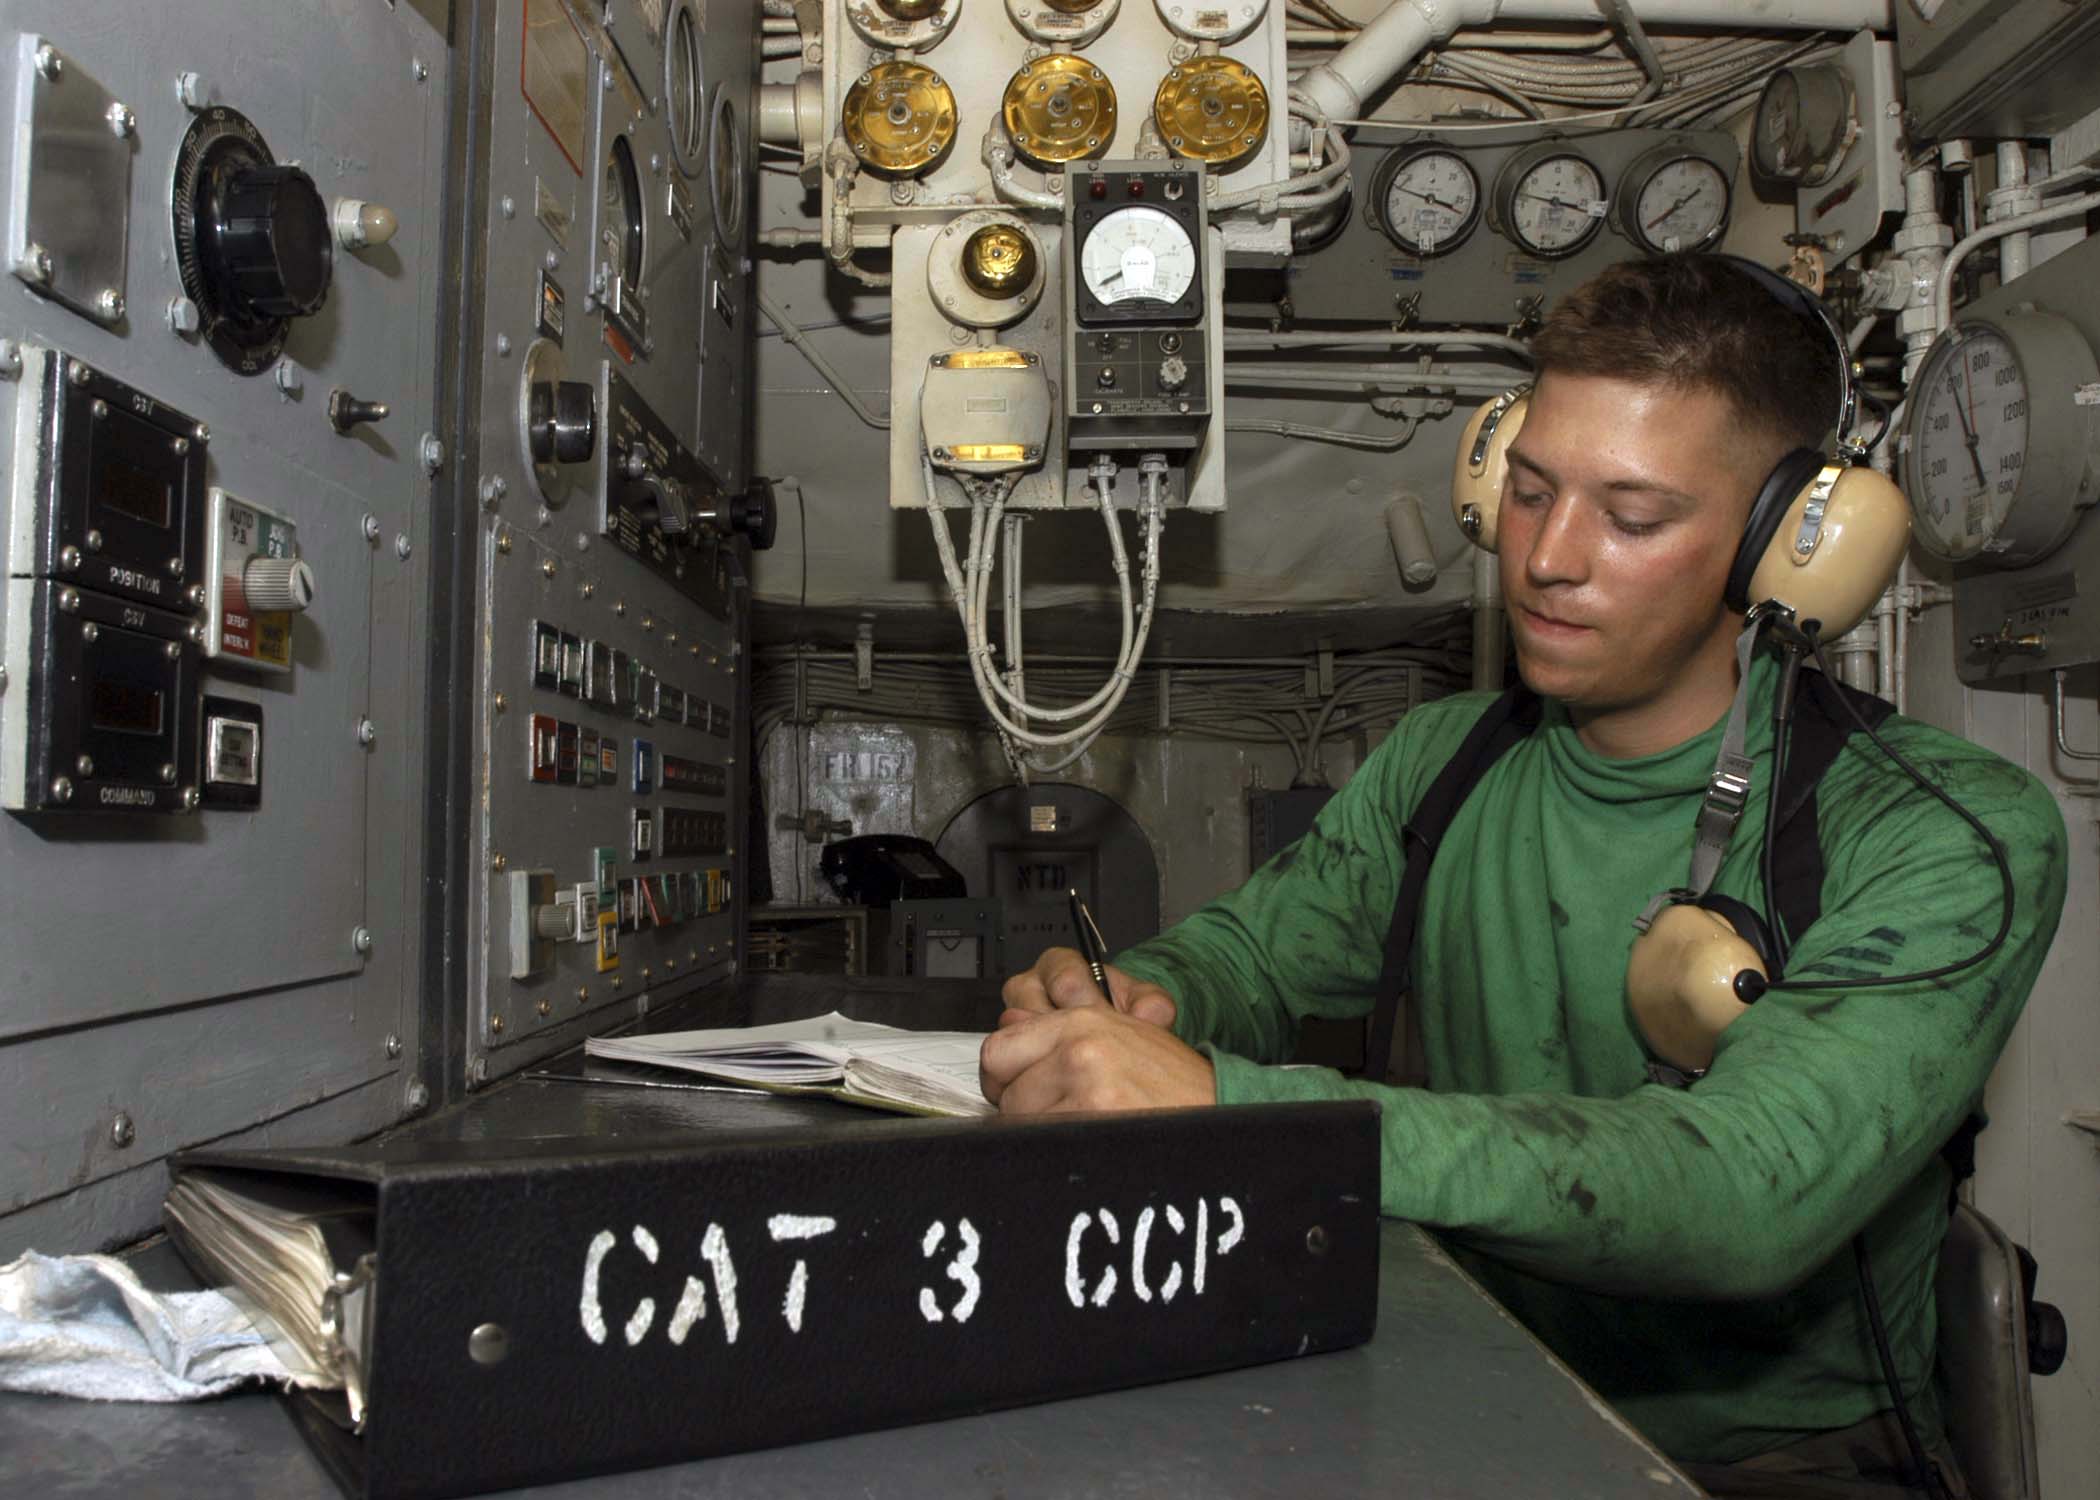 US Navy 041117-N-9079D-073 Airman Matt Rommel logs catapult shot numbers for Catapult Three in the Rotary Room aboard the Nimitz-class aircraft carrier USS Abraham Lincoln (CVN 72)